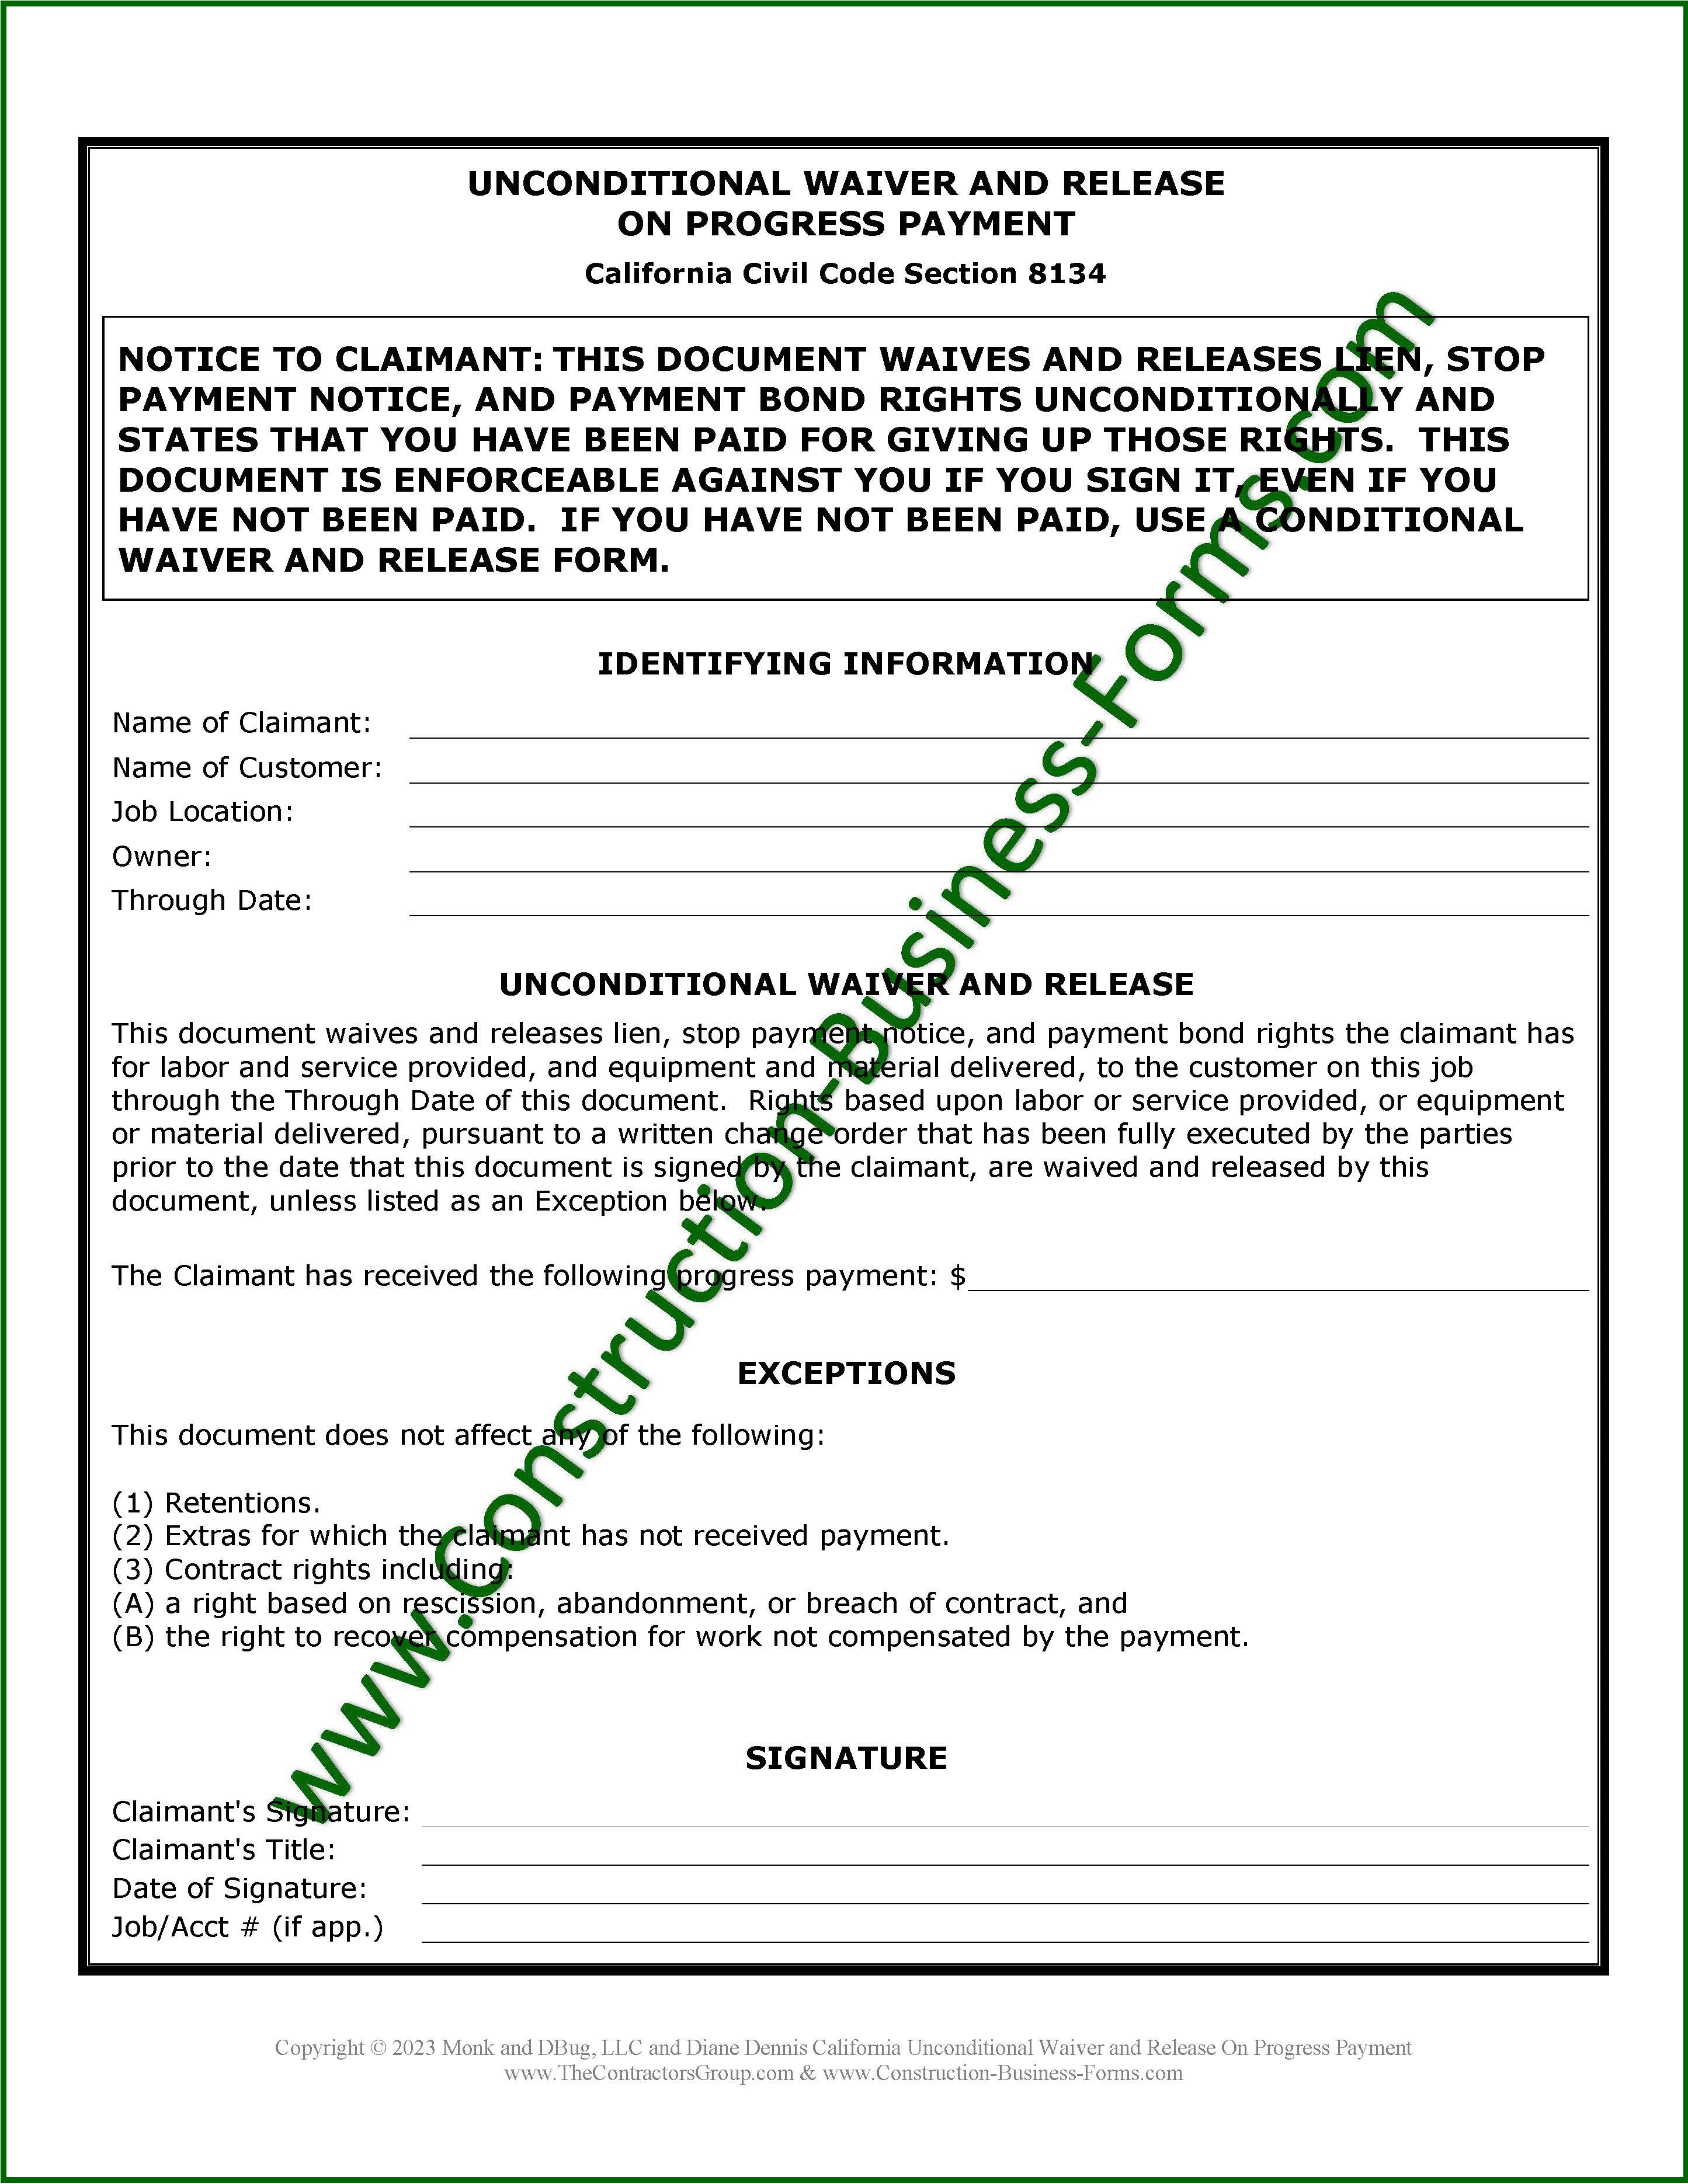 Image of California Unconditional Waiver and Release On Progress Payment form